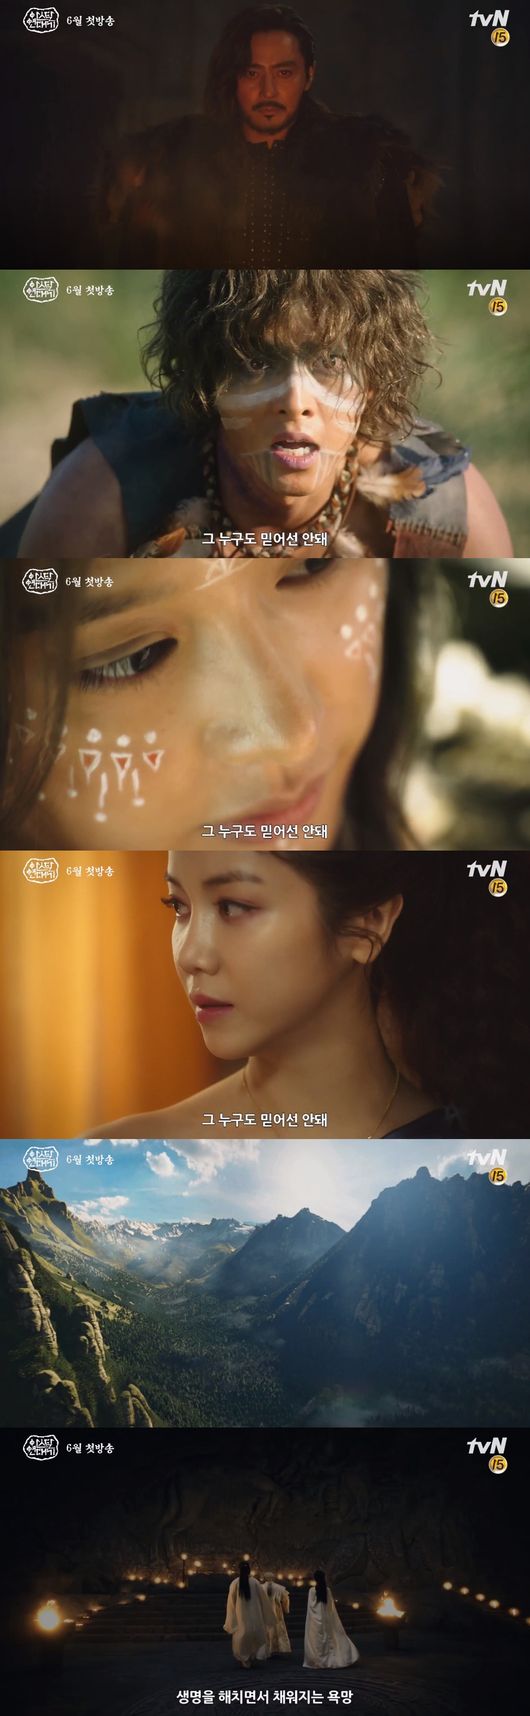 The teaser of Asdal Chronicle was unveiled, and Actors Jang Dong-gun, Song Joong-ki, Kim Ji-won and Kim Ok-bin were expecting a transformation of the past class that they could not see in the past.The teaser video for the TVN new Saturday drama Asdal Chronicle (playplayed by Kim Young-hyun, director Kim Won-seok) released on the 12th shows Eunsum (Song Joong-ki) asking about Tagon (Jang Dong-gun), narration of Desire to be filled with life, no one should believe and Tanya (Kim Ji-won) and Taealha (Kim Ok-bin) who boast beautiful beauty ...Especially, this is the situation that makes me wonder about the relationship between Tagon and Eunseom, the Tangya and Taealha, and their process of establishing Asdal.Here, the unfamiliar makeup that was not seen in the existing historical drama, the appearance of the four leading characters who digested it, and the Asdal Chronicles are known as a masterpiece with tens of billions of won. As a result, the huge set and nature in the teaser capture the attention of viewers at once.So, with the appearance of a moment, the story and direction that the four leading Actors who showed a unique presence and the story and direction that no one expected will achieve synergy, and the Asdal Chronicle which will soon take off the veil following confession is gathering attention and expectation.Meanwhile, Asdal Chronicle is an ancient human historical drama about the birth of the nation and the civilization of the first era in Korea.It depicts the struggle, harmony, and mythical heroic stories of people living in the virtual land As.Kim Young-hyun, Park Sang-yeon, who wrote Kwon Ryong I Narsa, Deep Rooted Tree, and Seondeok Queen, and Kim Won-seok PD, who directed microbiology, signal and my uncle, have joined together.Asdal Chronicles Broadcast Screen Capture and Logo